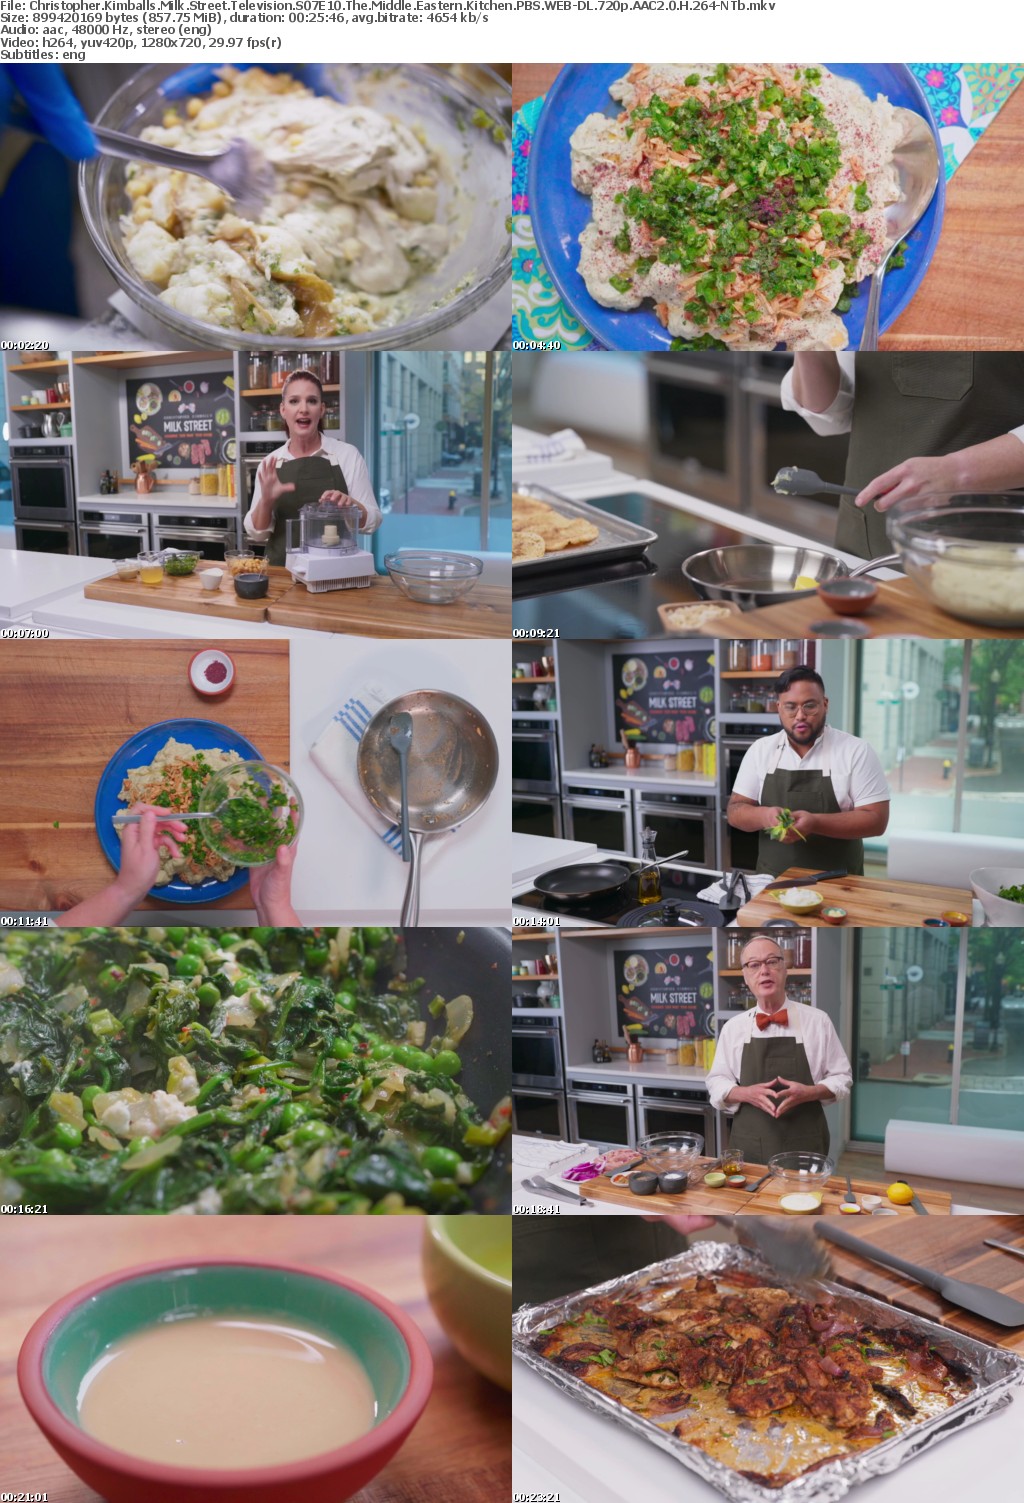 Christopher Kimballs Milk Street Television S07E10 The Middle Eastern Kitchen PBS WEB-DL 720p AAC2 0 H 264-NTb